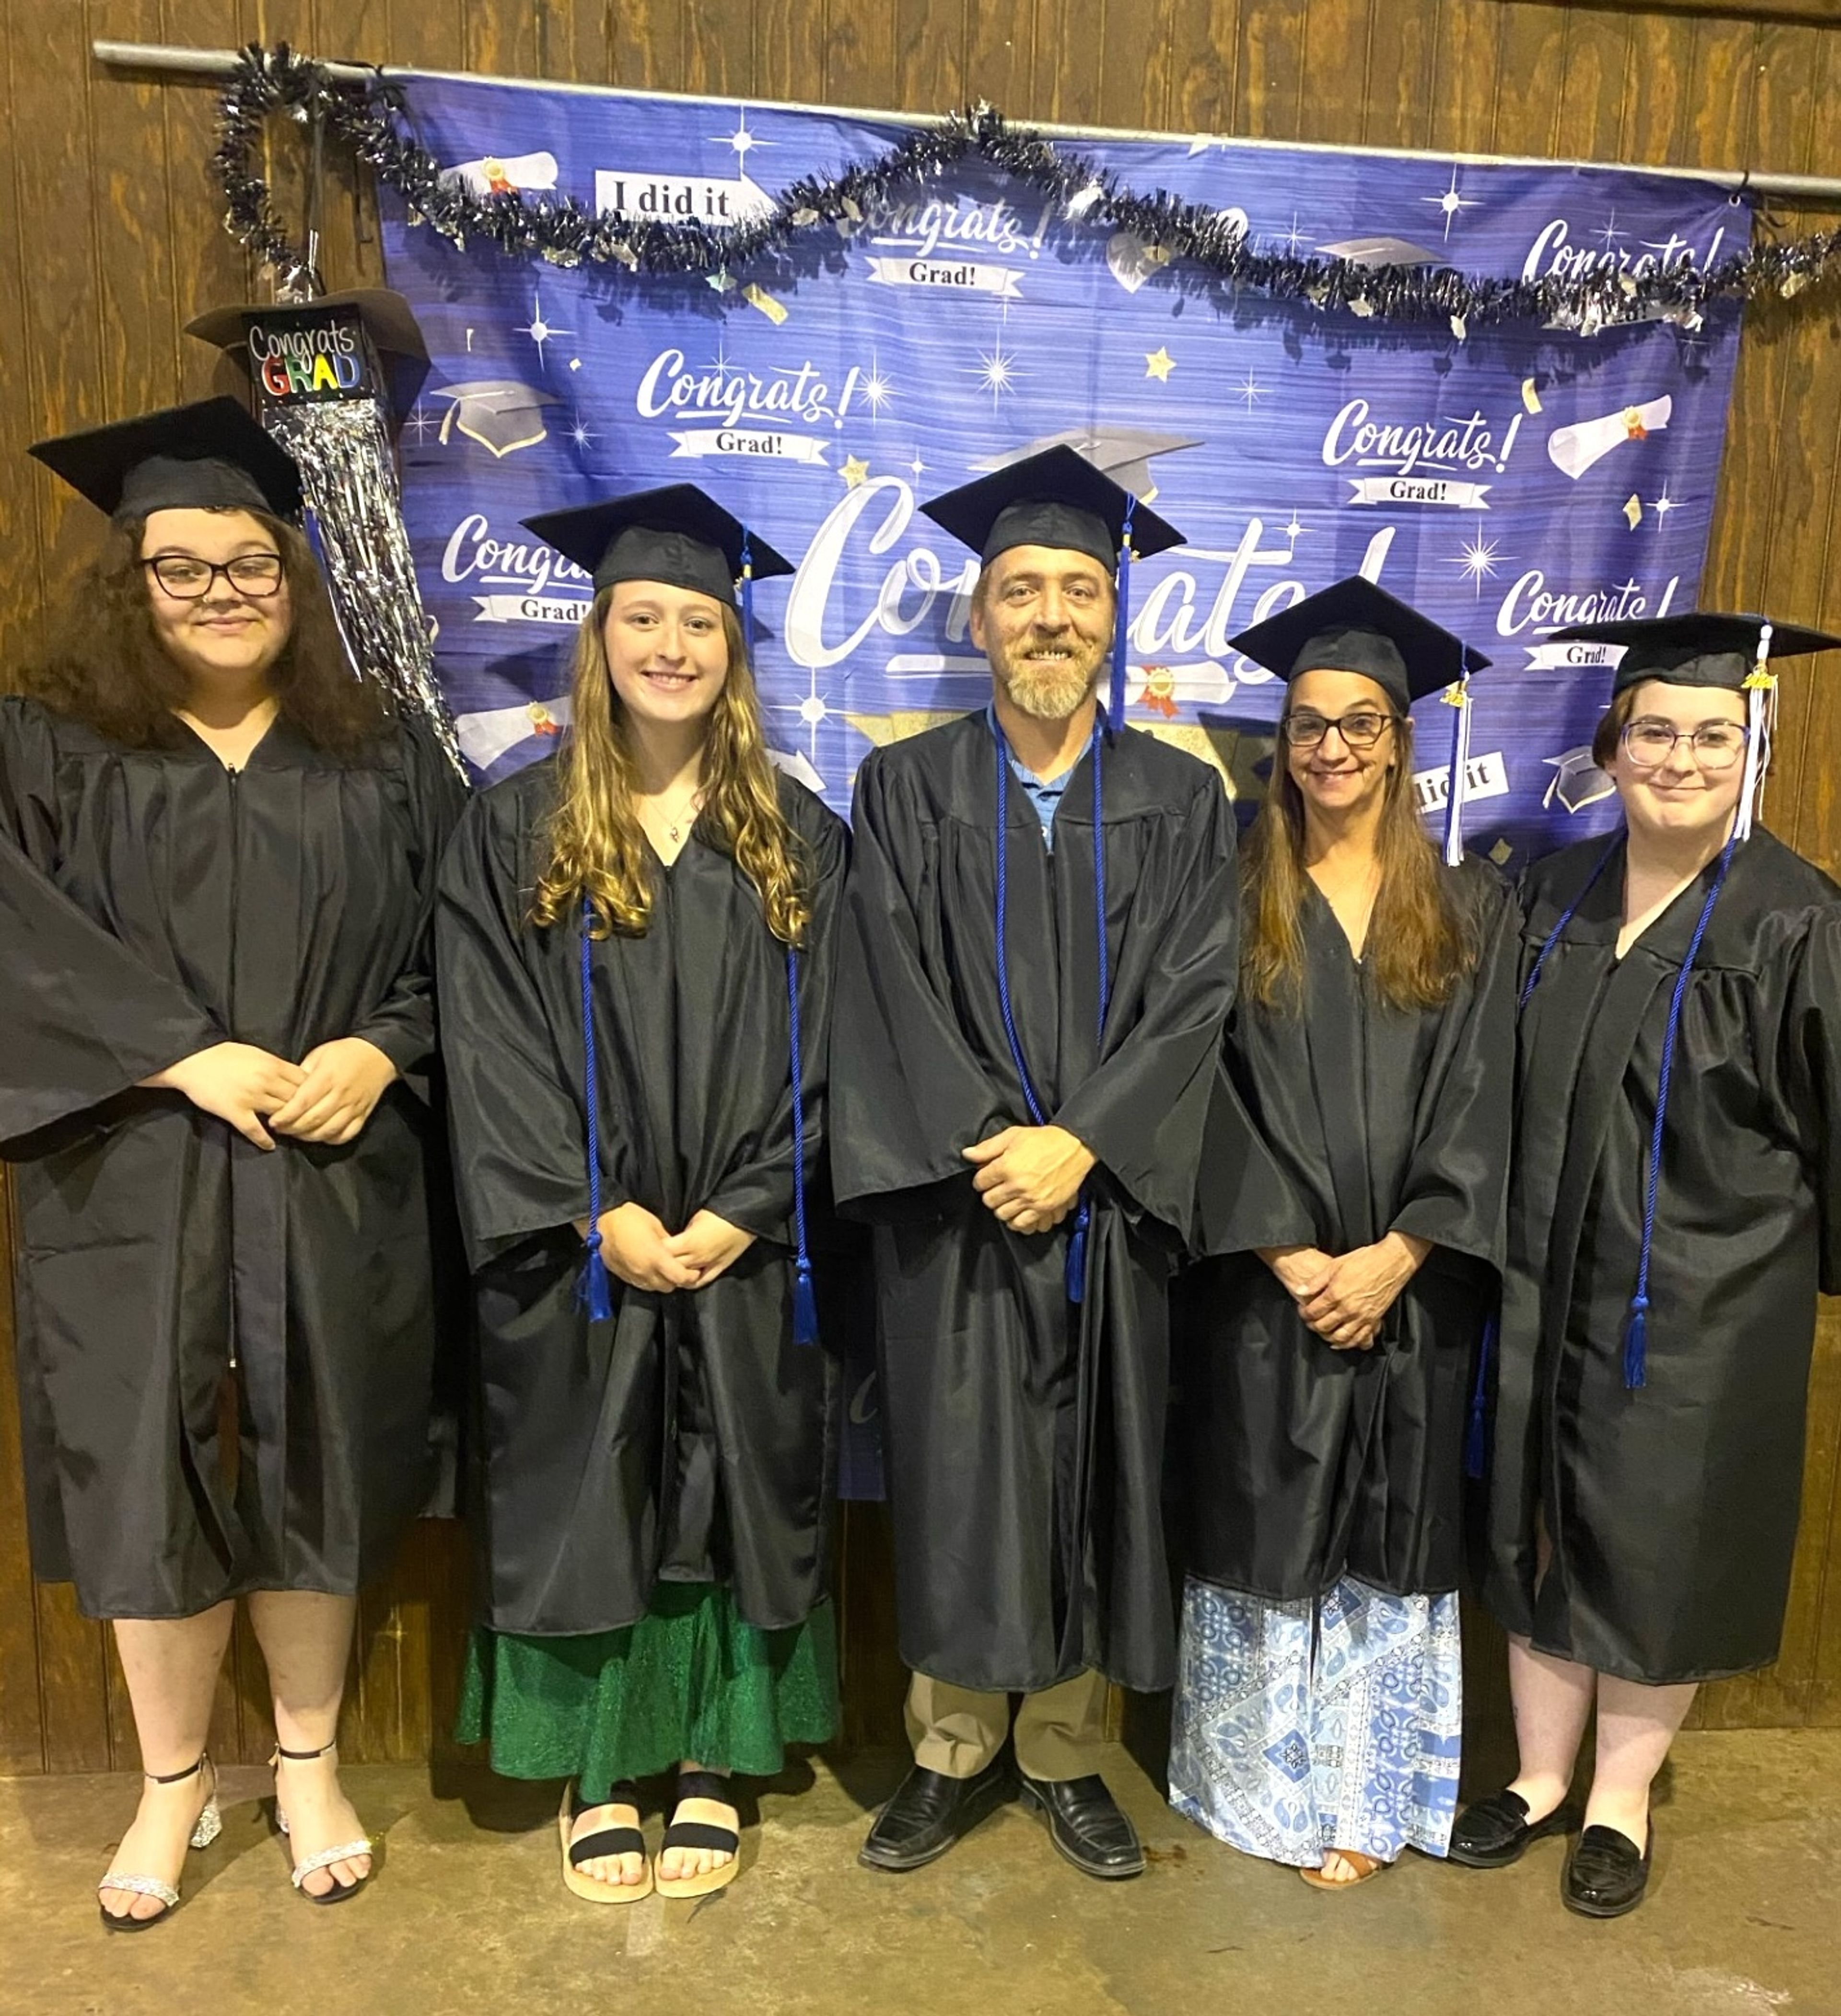 
Autumn Montgomery, Kayedy Ross, husband-and-wife duo Chris and Pam Masters, and Samantha Plaza-Bacon don their caps and gowns earlier this month for the 2024 HiSET graduation in Bollinger County. (Not pictured are HiSET graduates Quentin Smith and Katie Burton.) Chris Masters, Ross and Plaza-Bacon all graduated with honors with a score over 80 points. HiSET classes will start again in August. Classes are from 5 to 8 p.m. Monday and Tuesday at Bollinger County Library in Marble Hill. Debbie Lincoln is the teacher. For more information, contact Cape AEL at (573) 334-3669.
